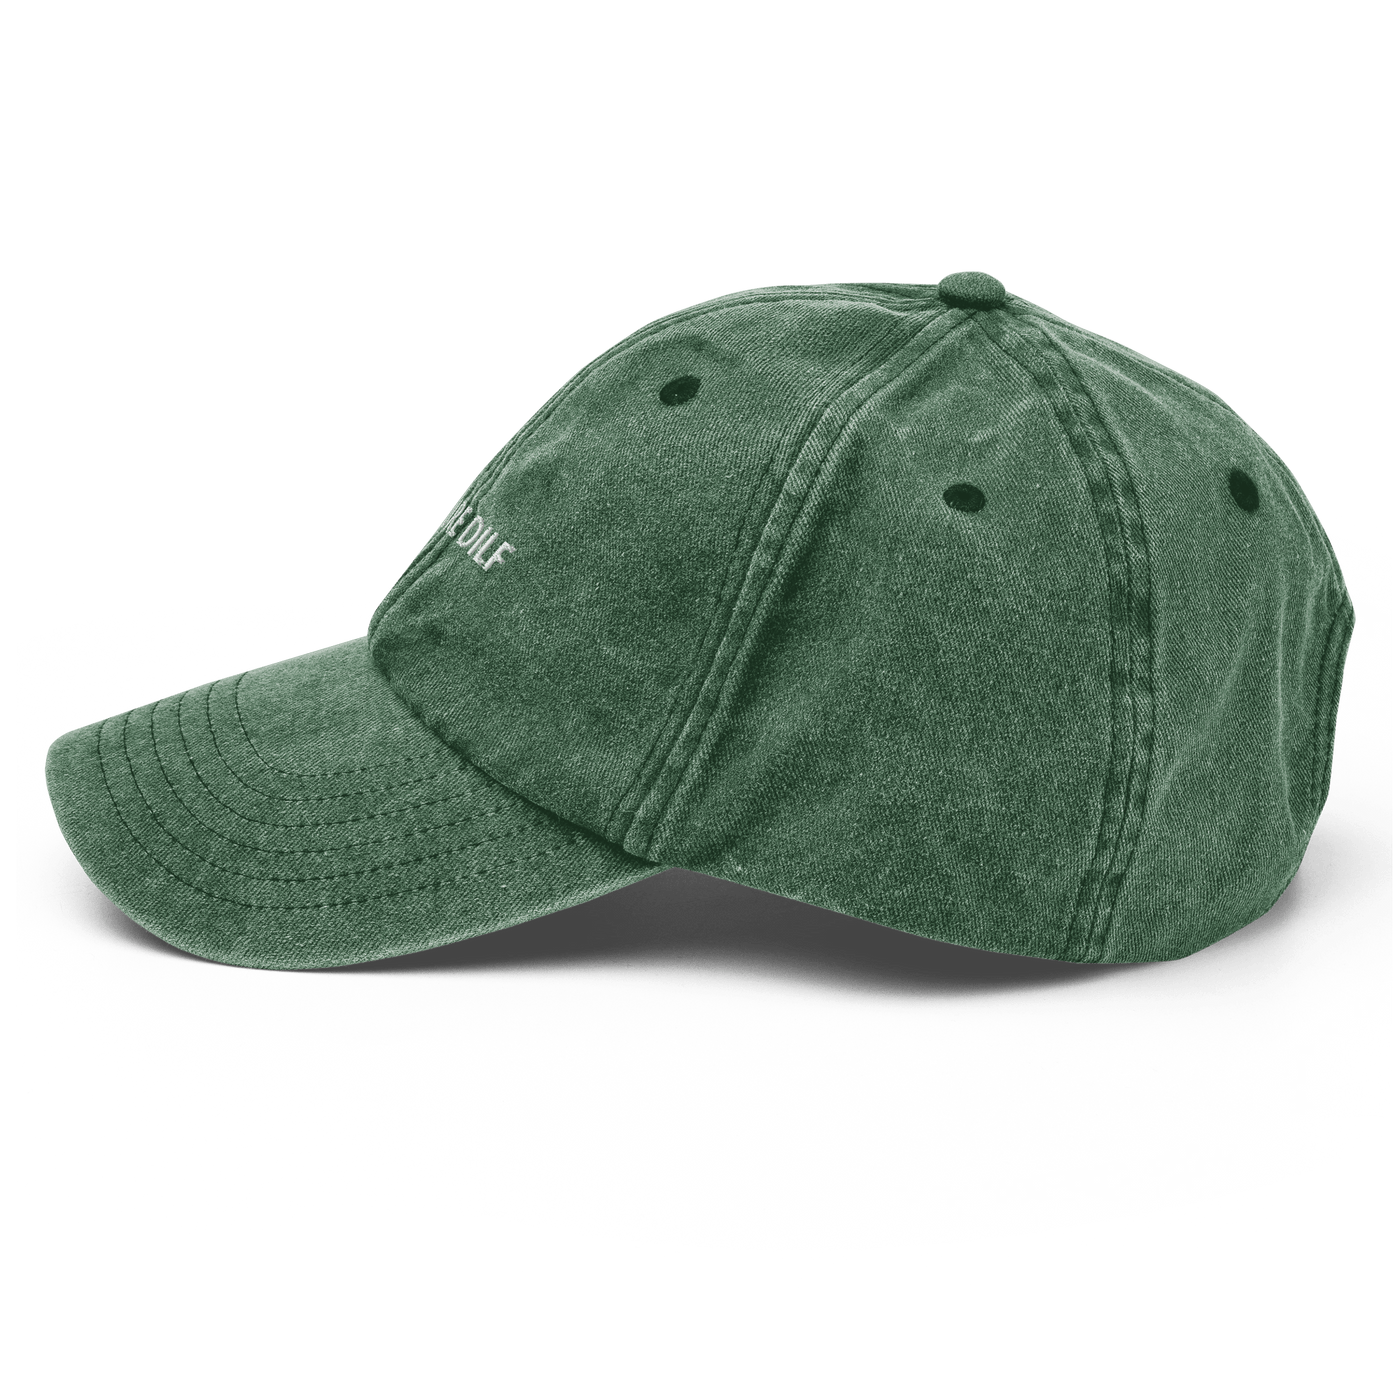 Future Dilf Vintage Hat - Vintage Bottle Green - - Just Another Cap Store